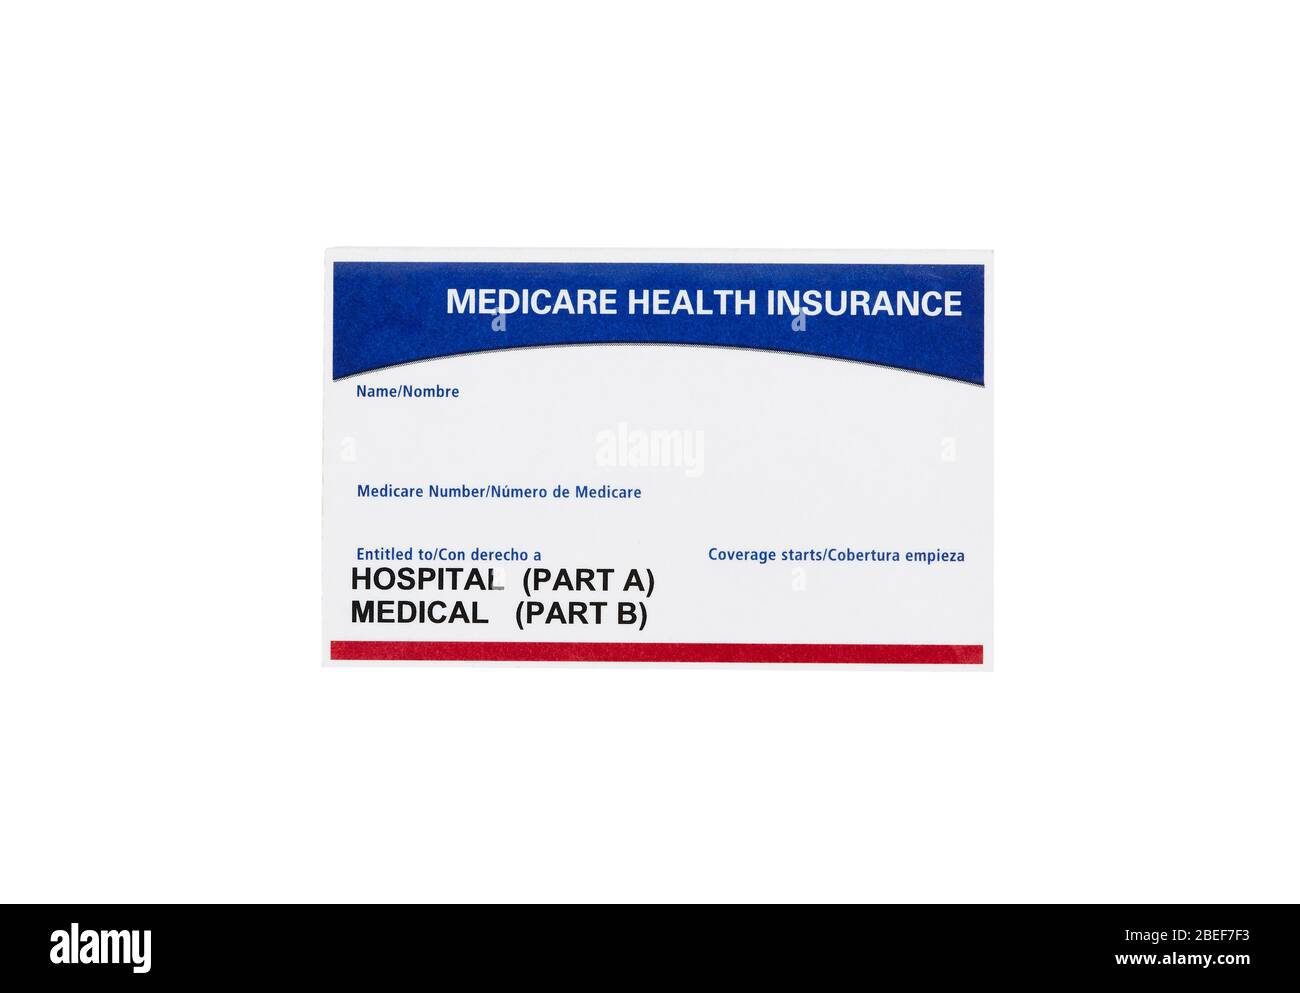 medicare-health-insurance-card-isolated-on-white-stock-photo-alamy